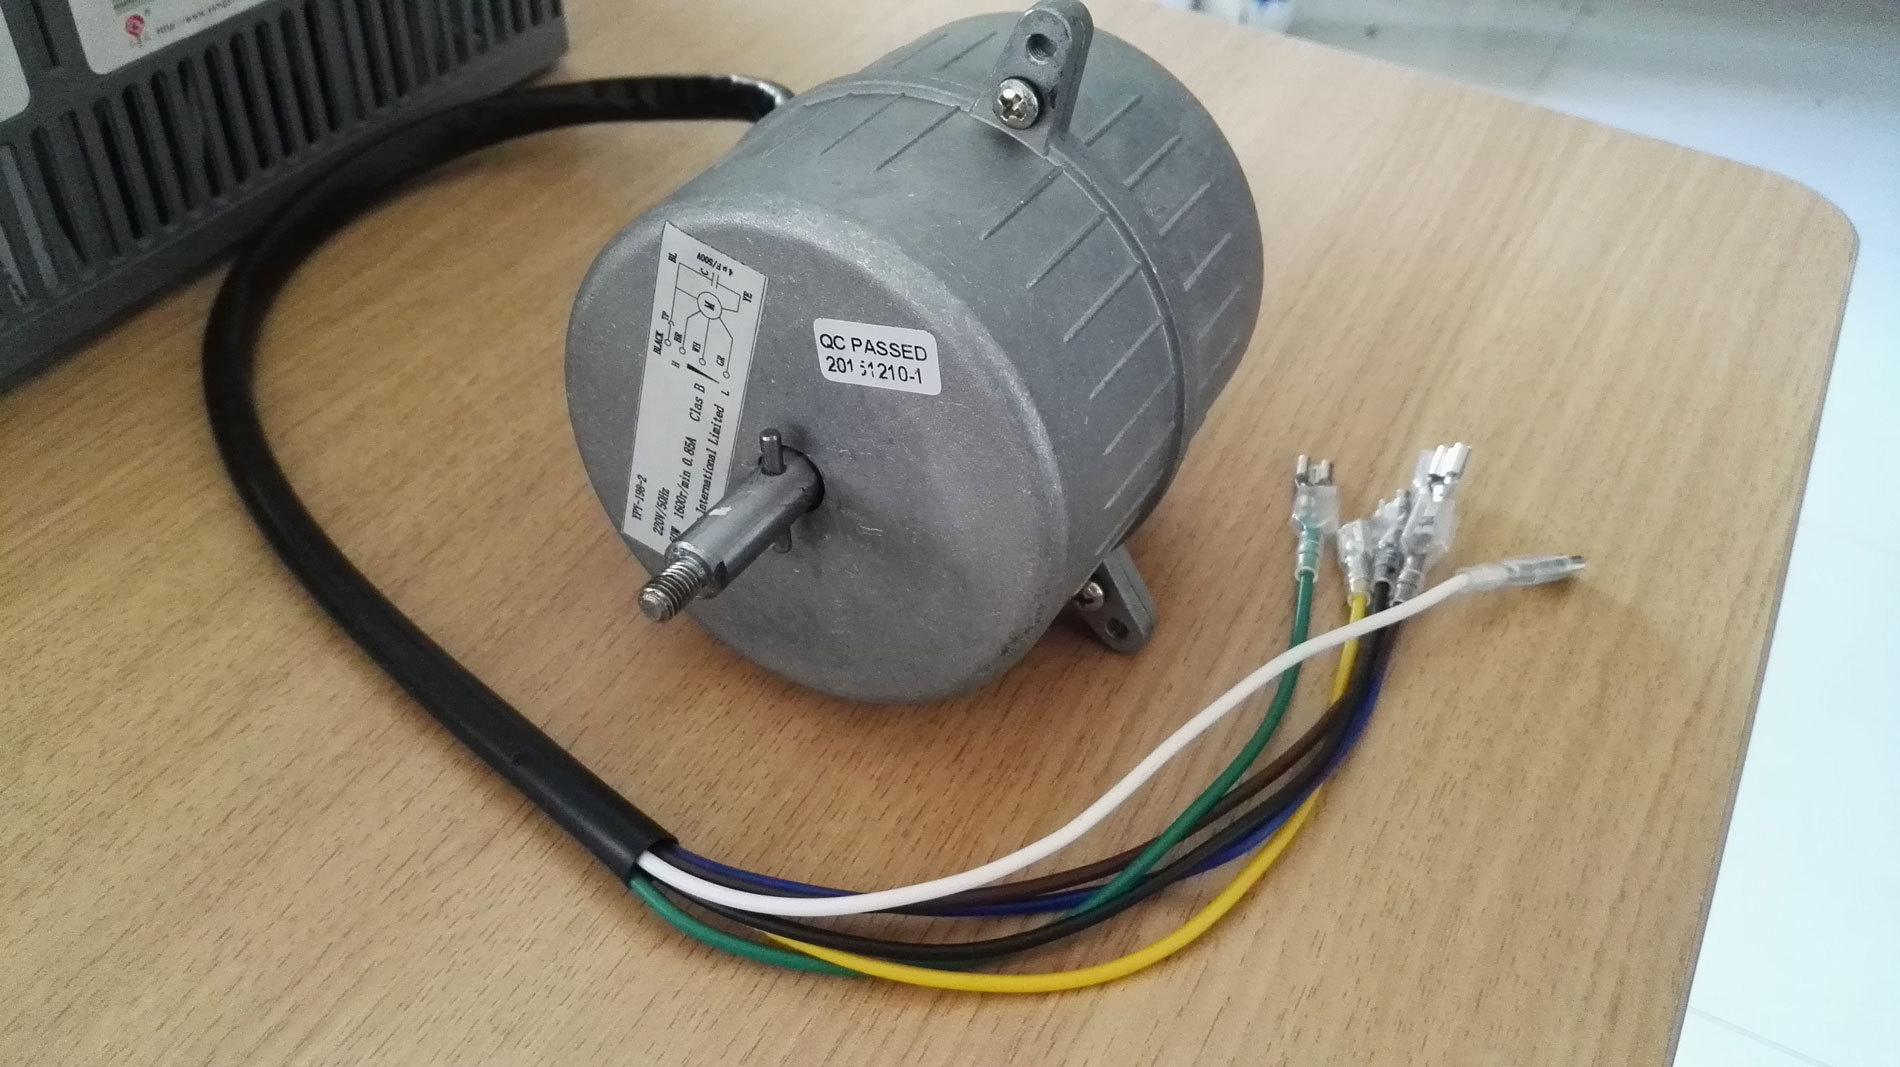 RT-198 Motor with Capacitor for kitchen hood